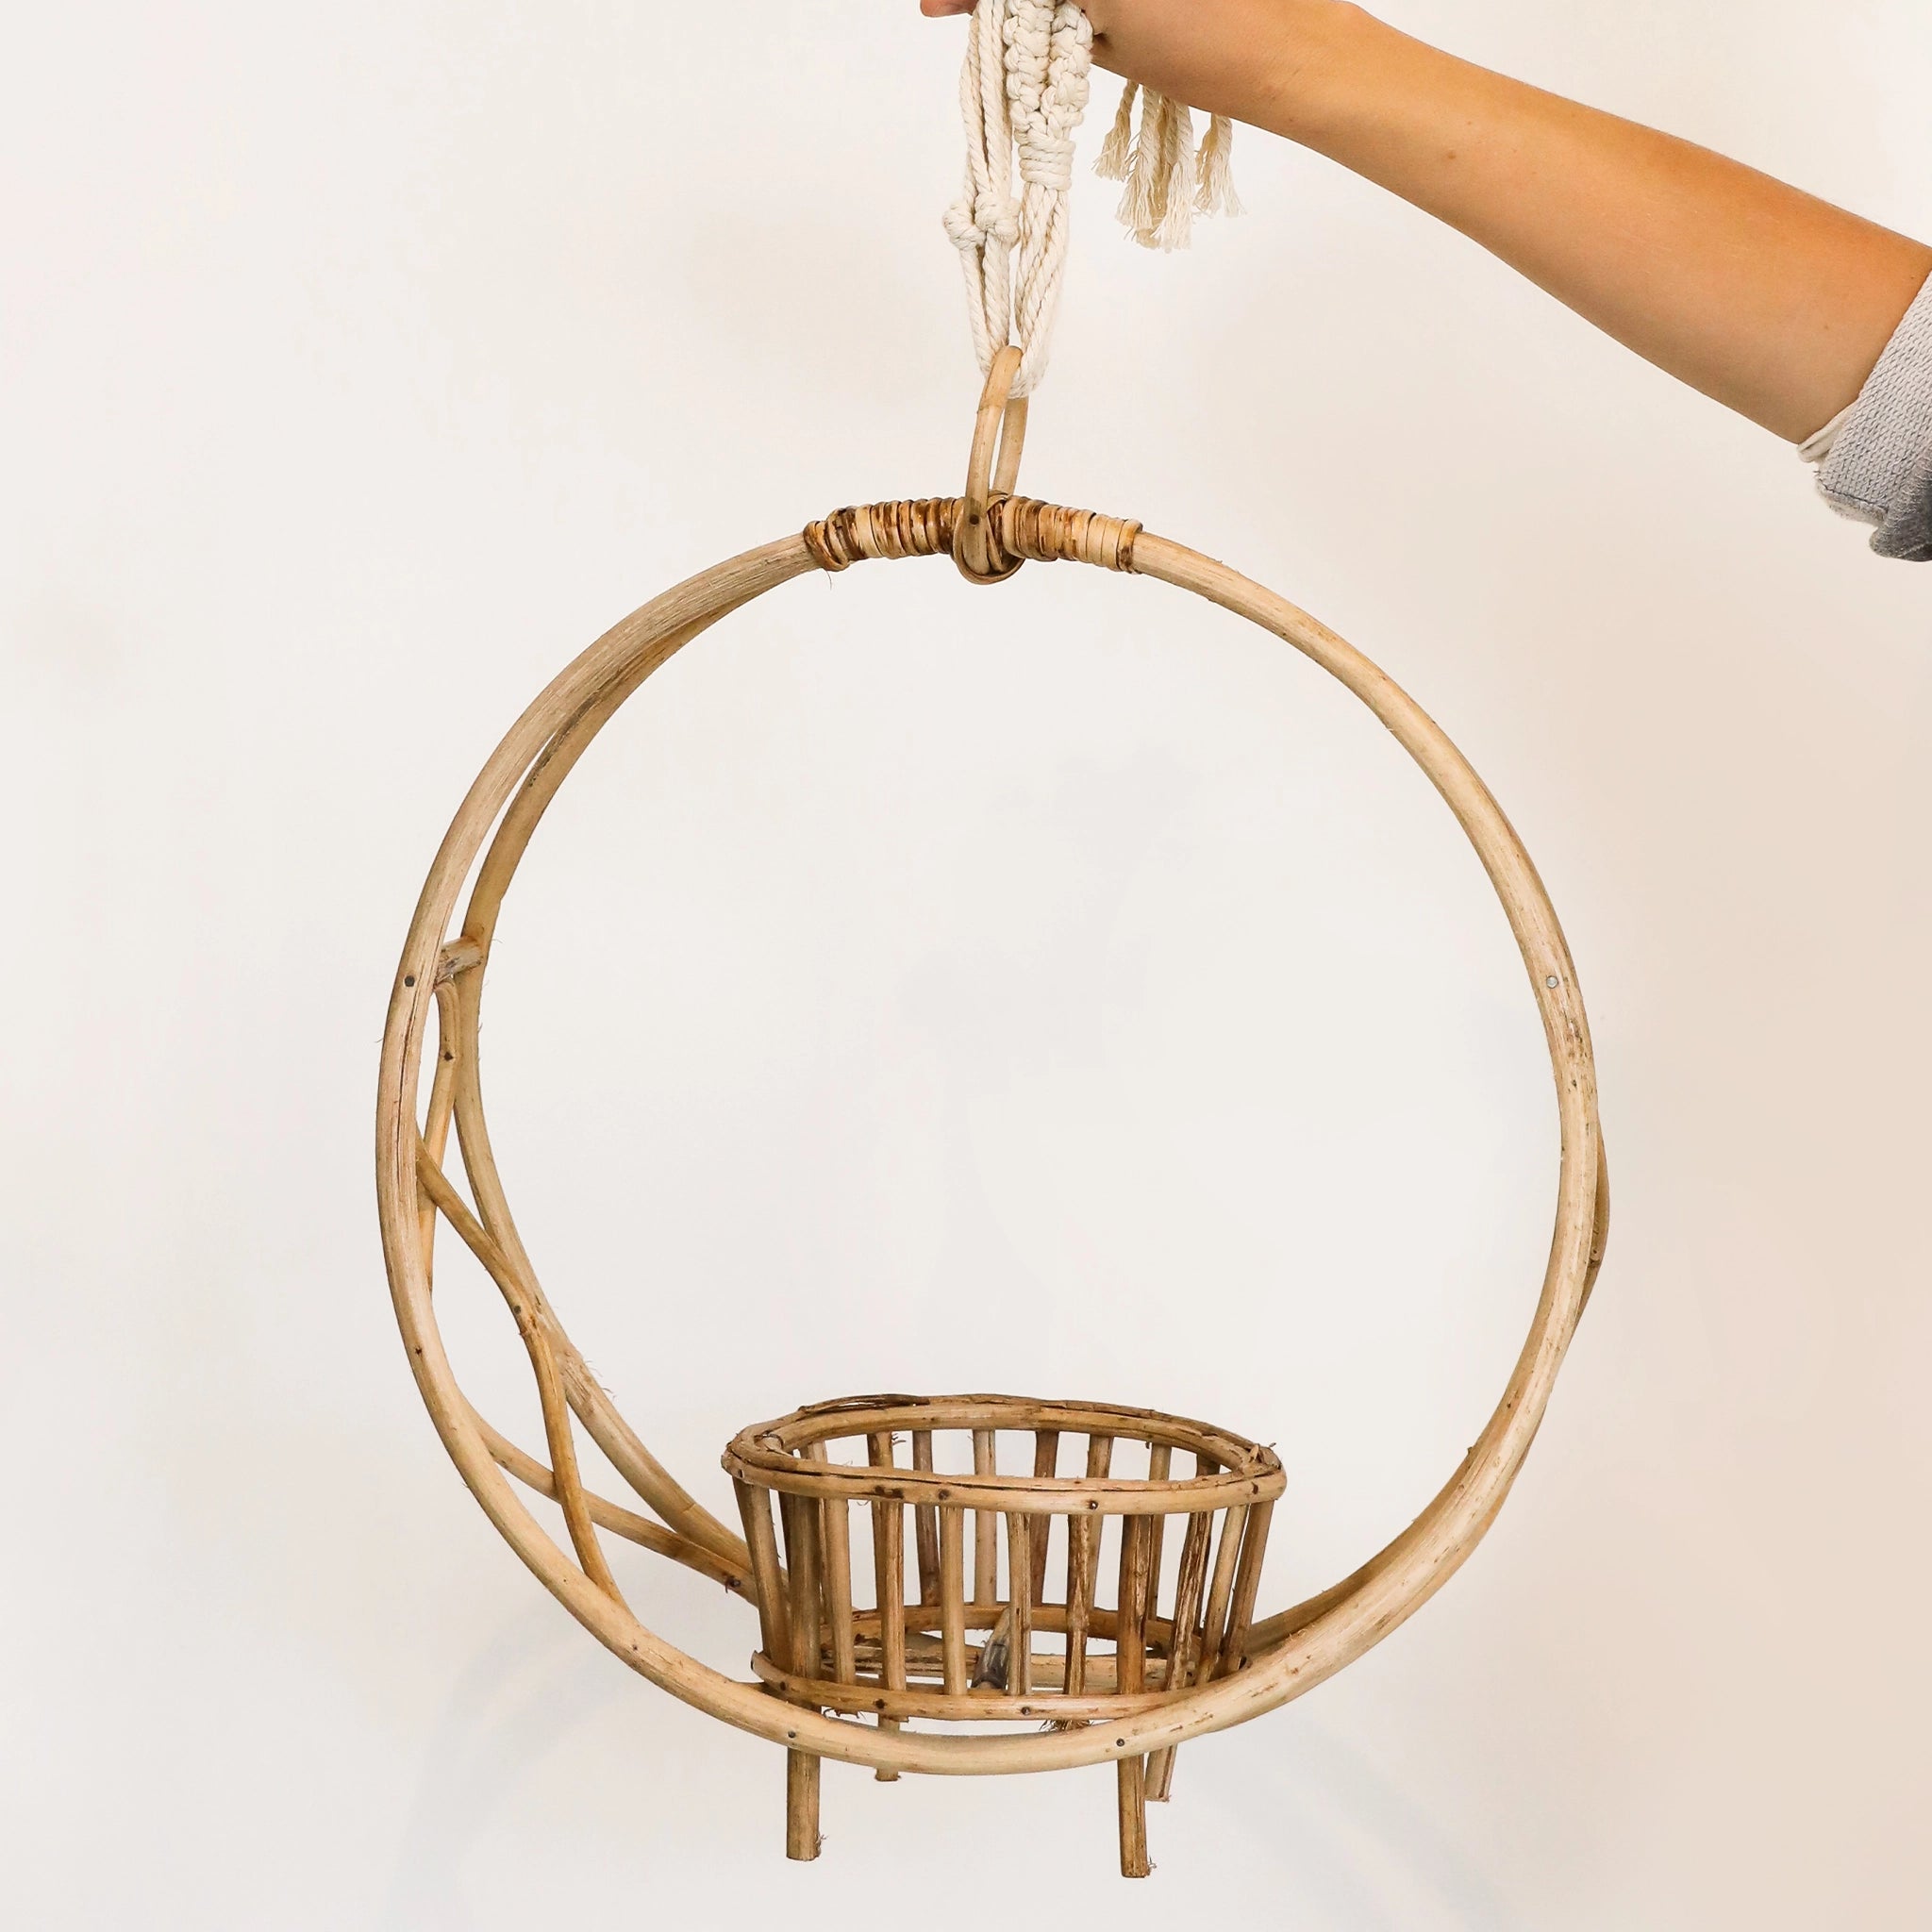 In front of a white background is a circle rattan plant holder. On the bottom inside of the holder is a rattan pot to hold the plant. Below the rattan pot is four rattan pegs. At the top of the rattan circle is a small rattan hook.